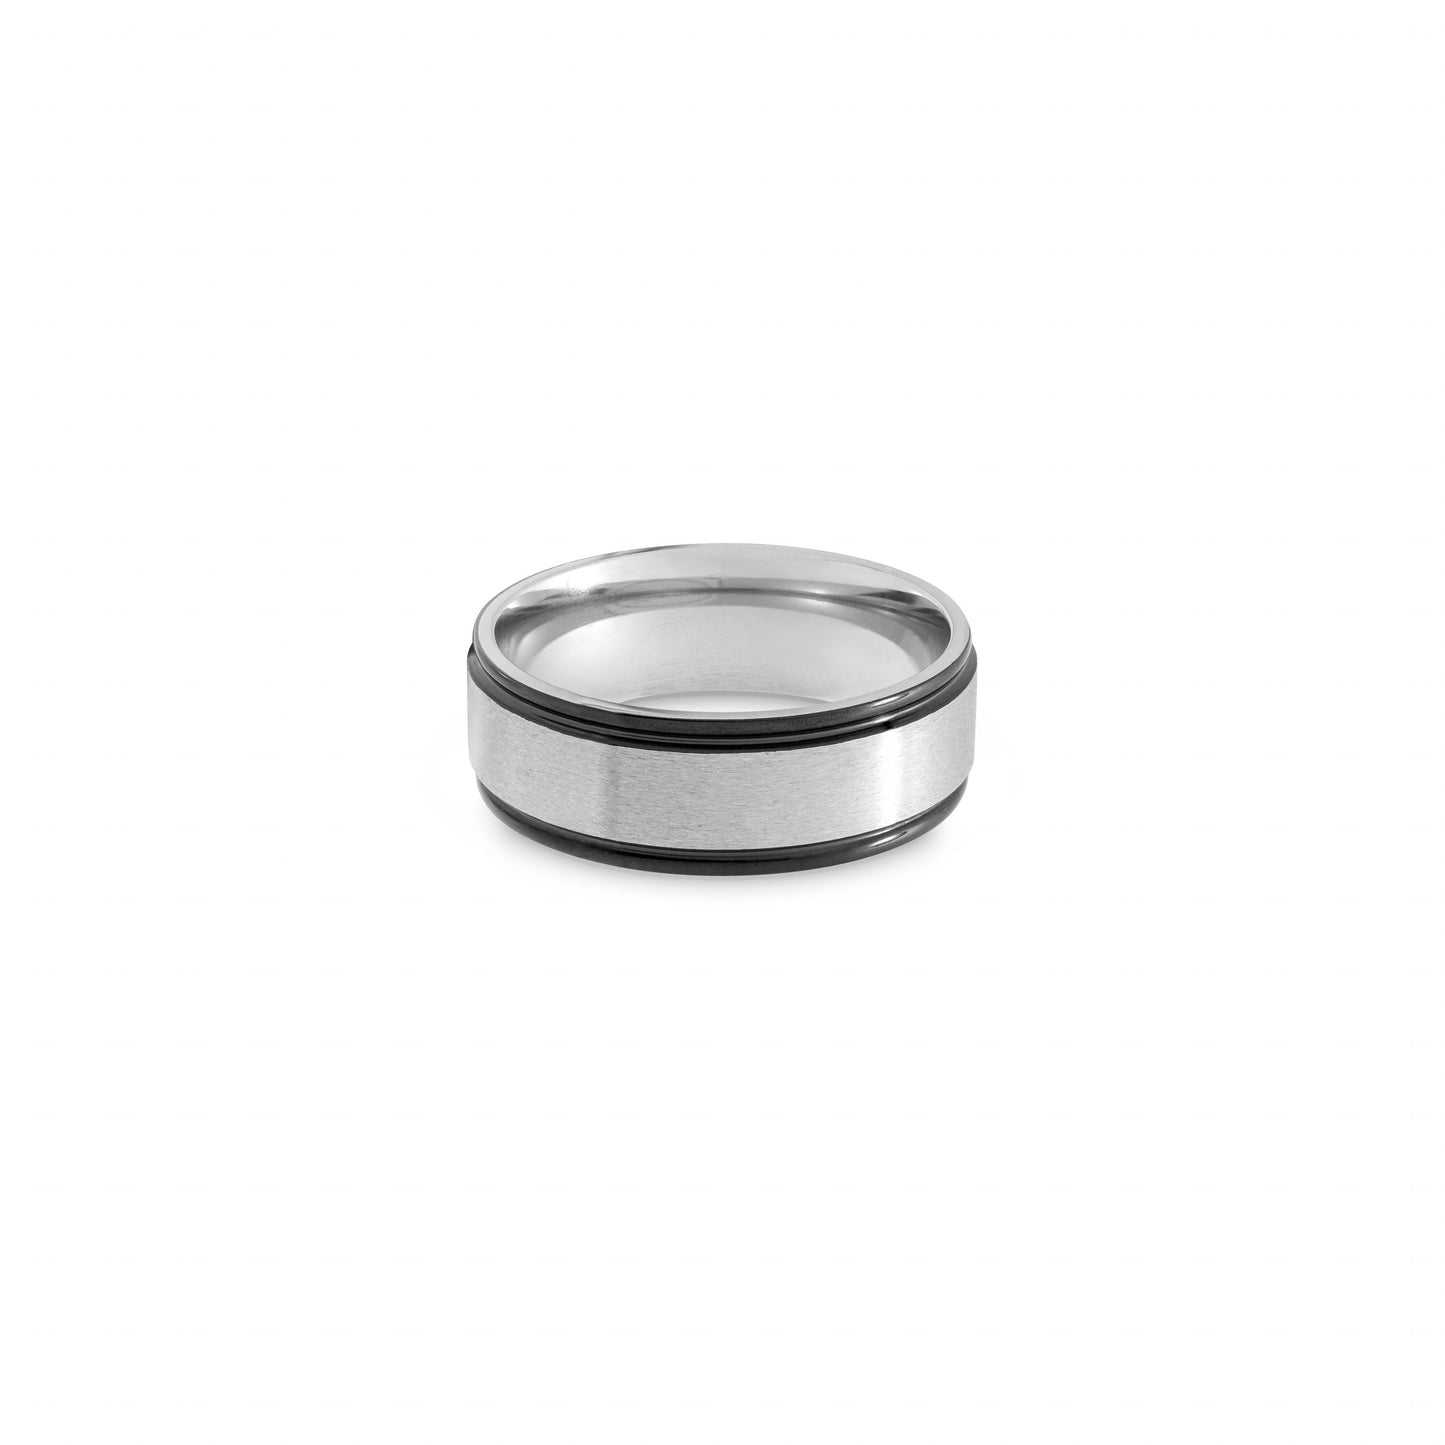 test of Black Trim Stainless Steel Ring